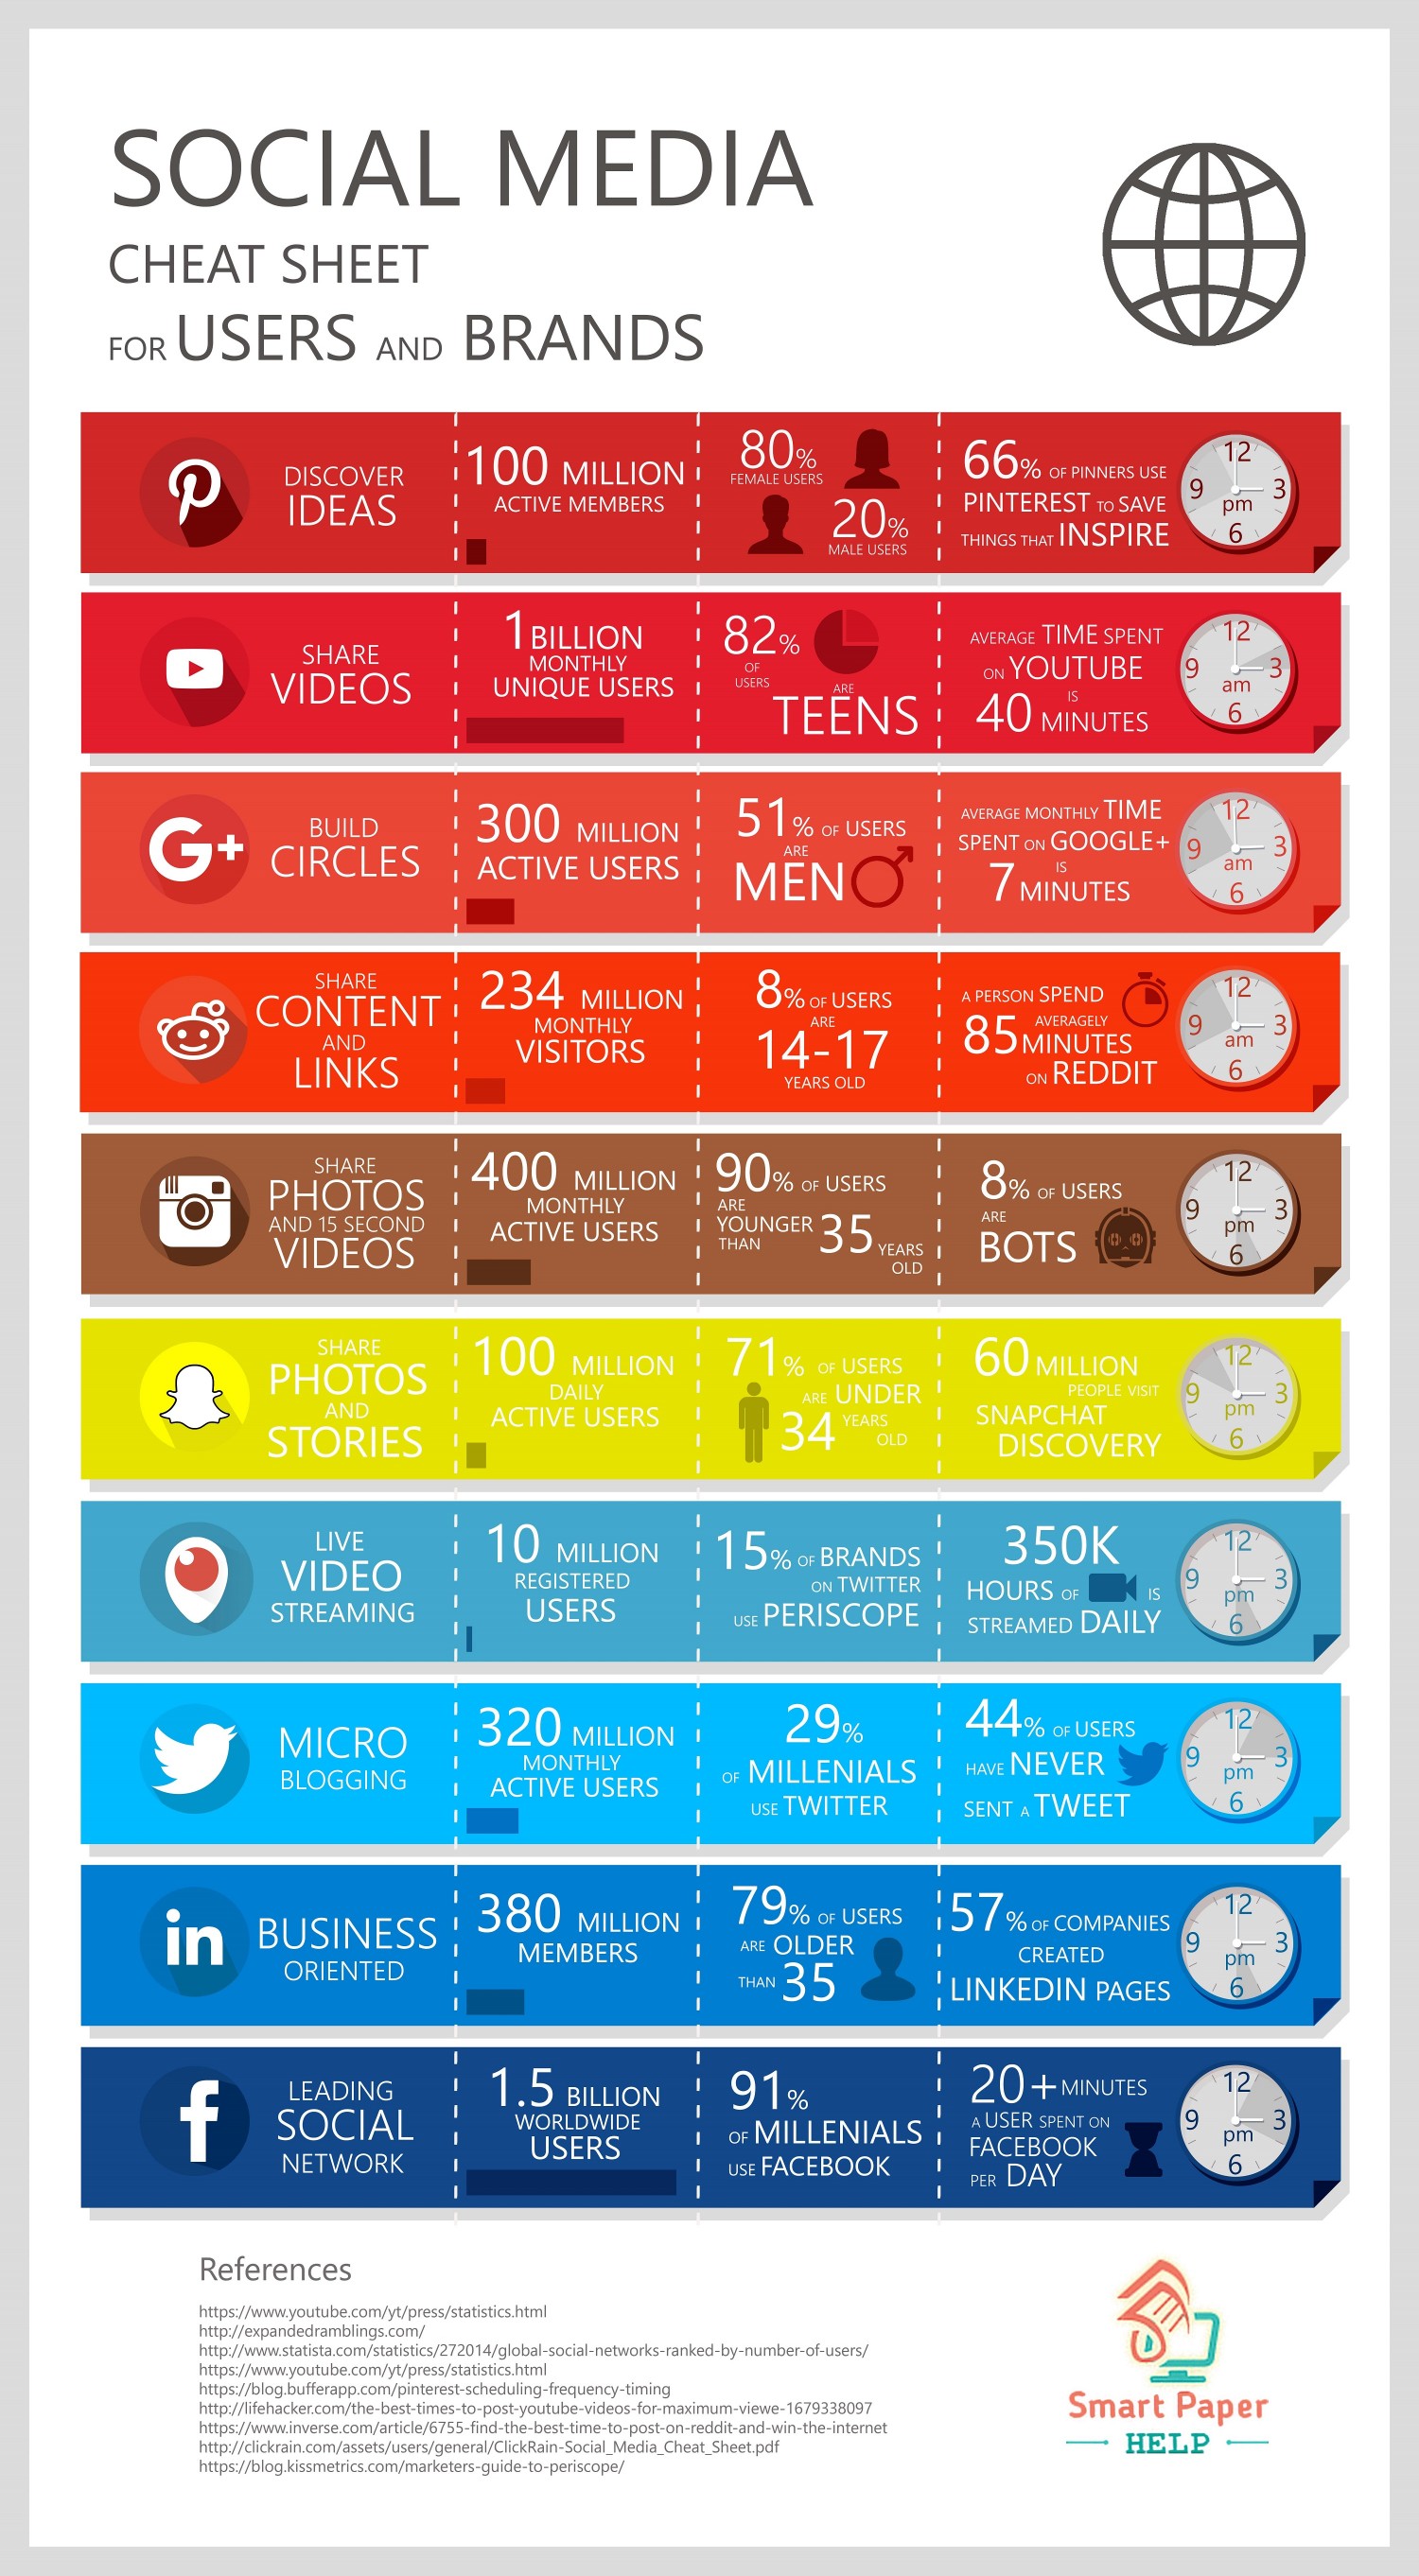 Social Media Cheat Sheet for Users and Brands | Visual.ly